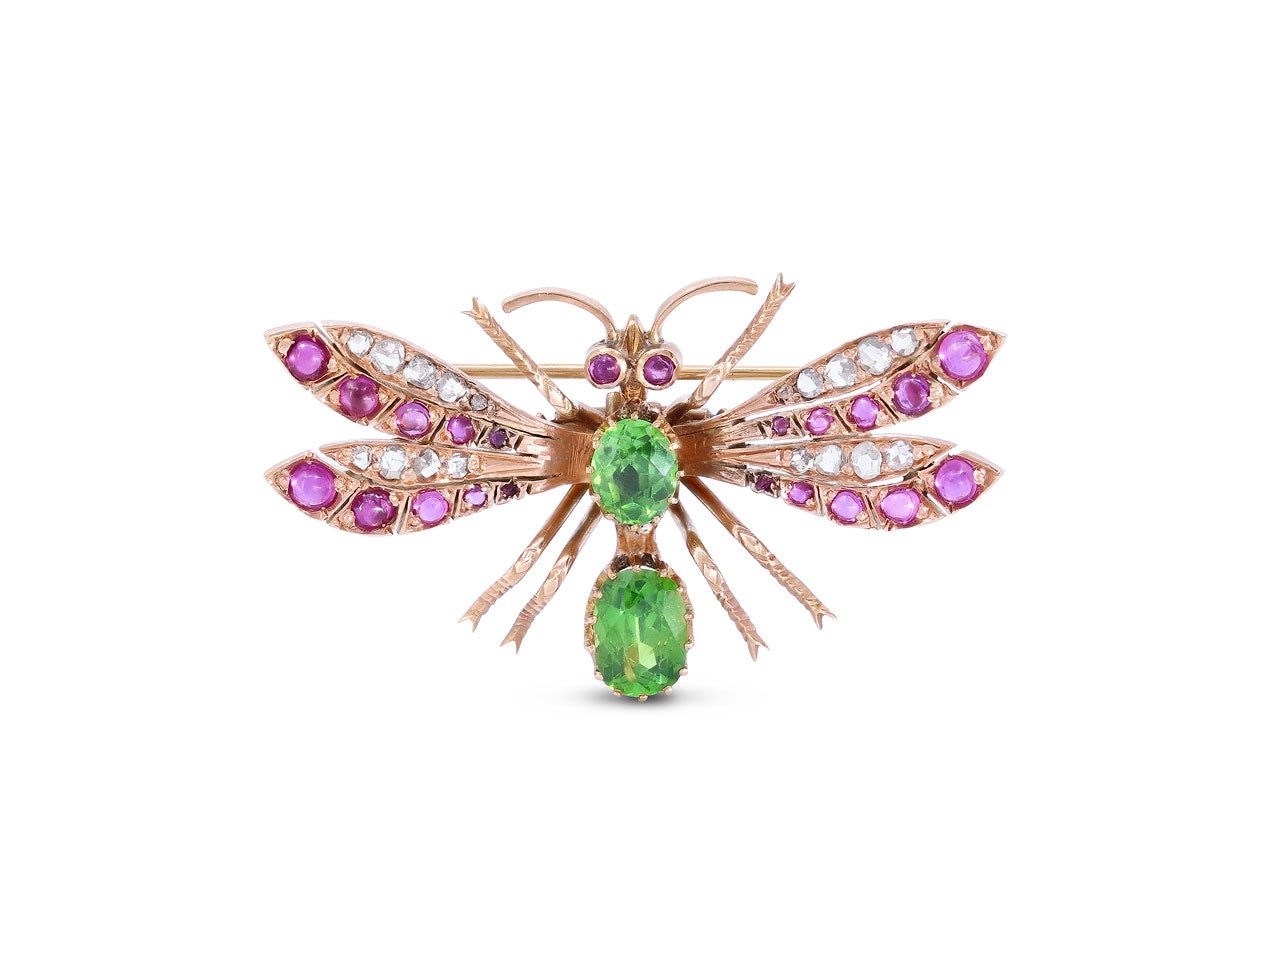 Antique Victorian Multi-Gem Insect Brooch in 15K Rose Gold